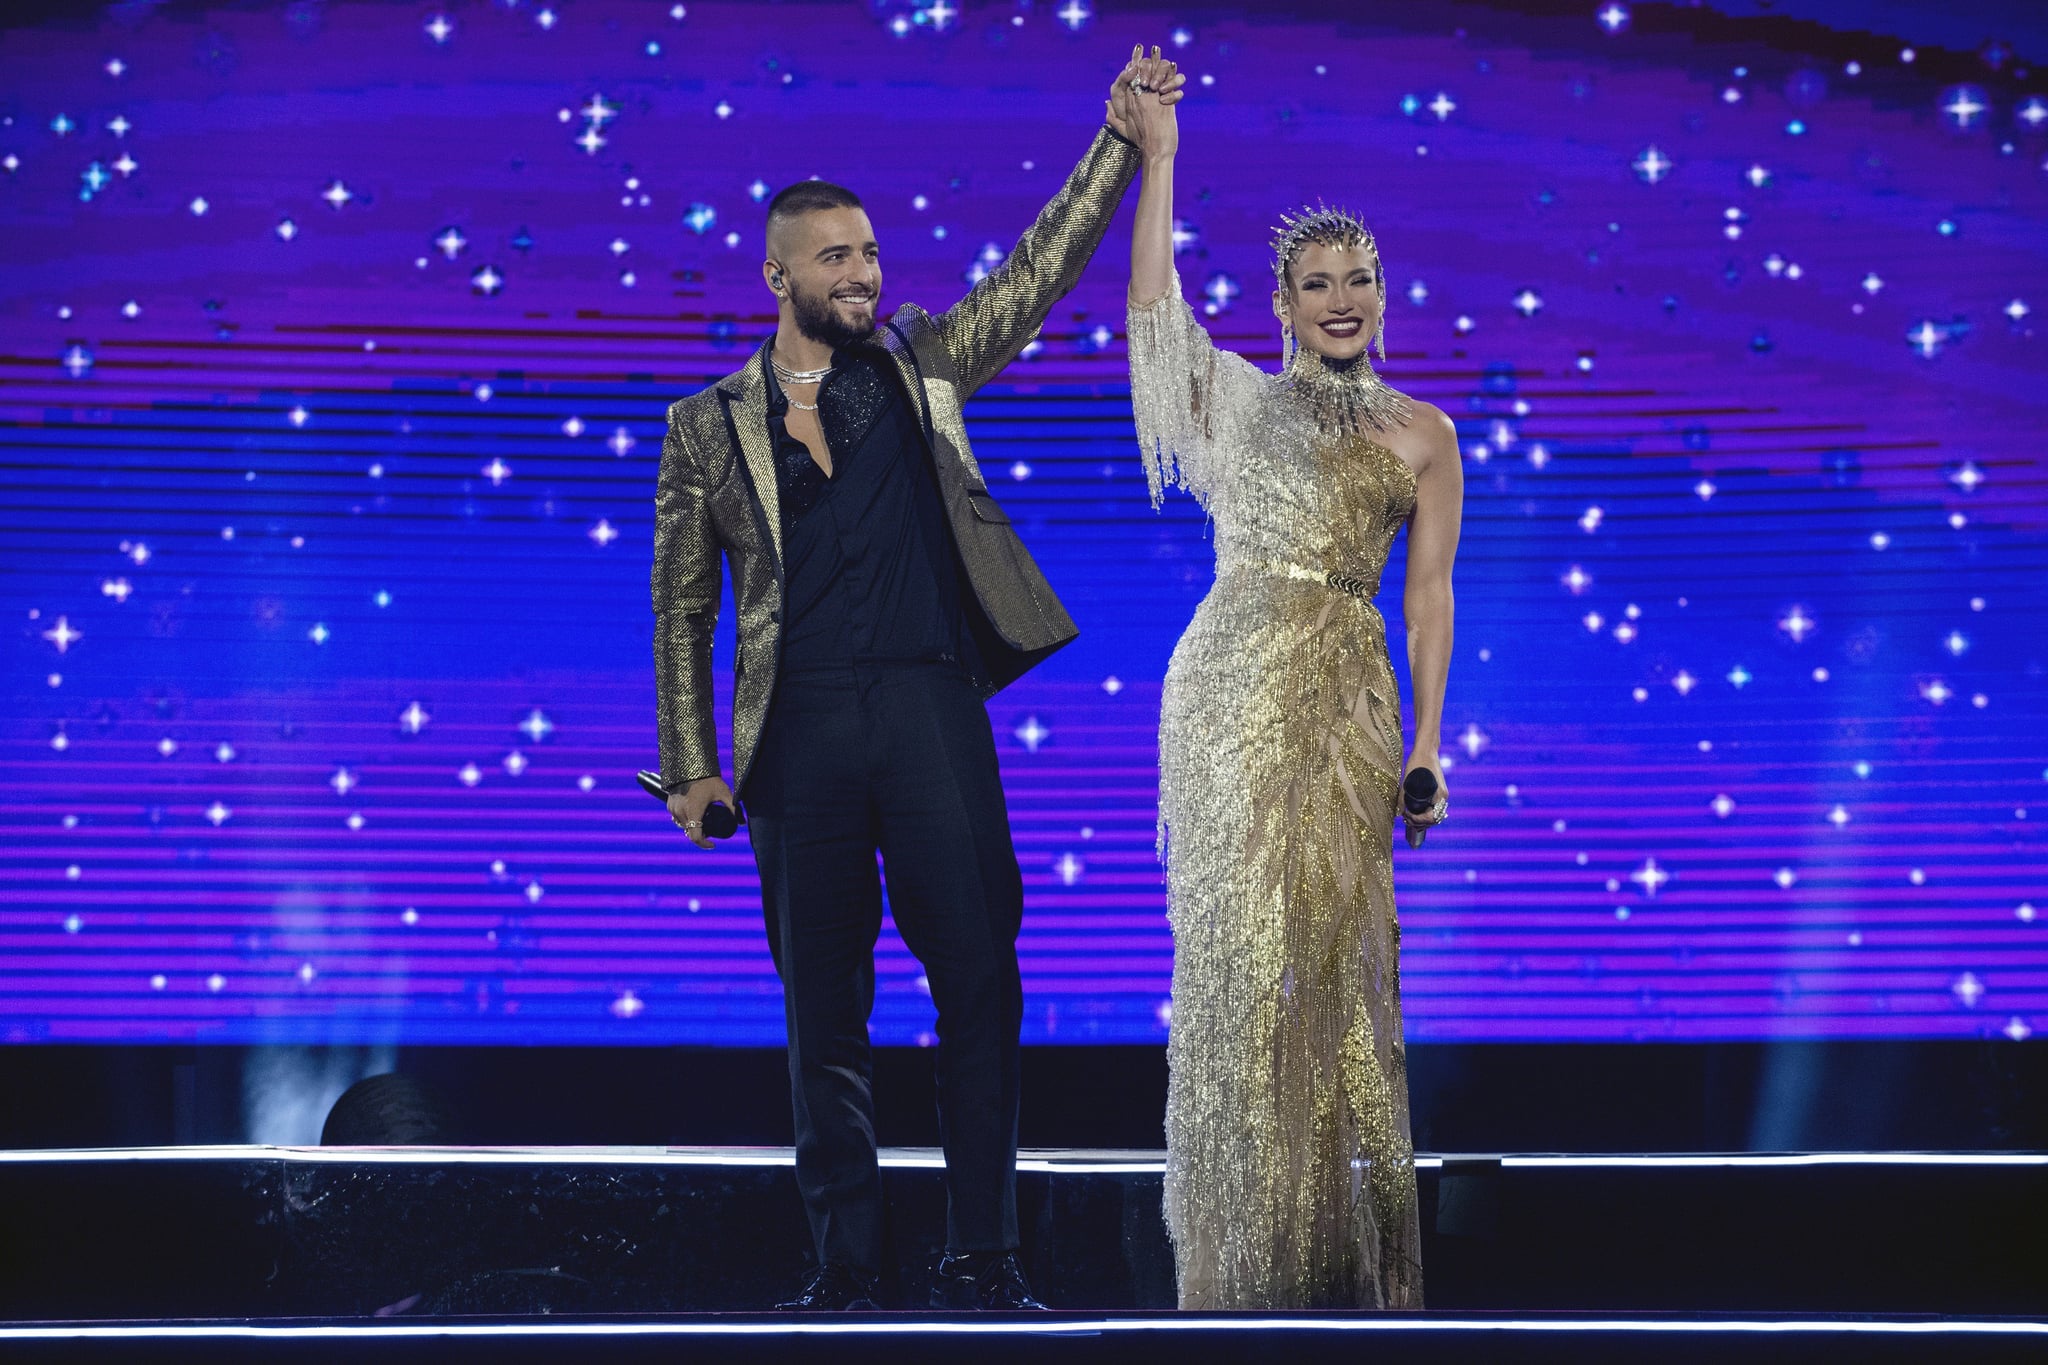 MARRY ME, from left: Maluma, Jennifer Lopez, 2022. ph: Barry Wetcher / Universal Pictures / Courtesy Everett Collection